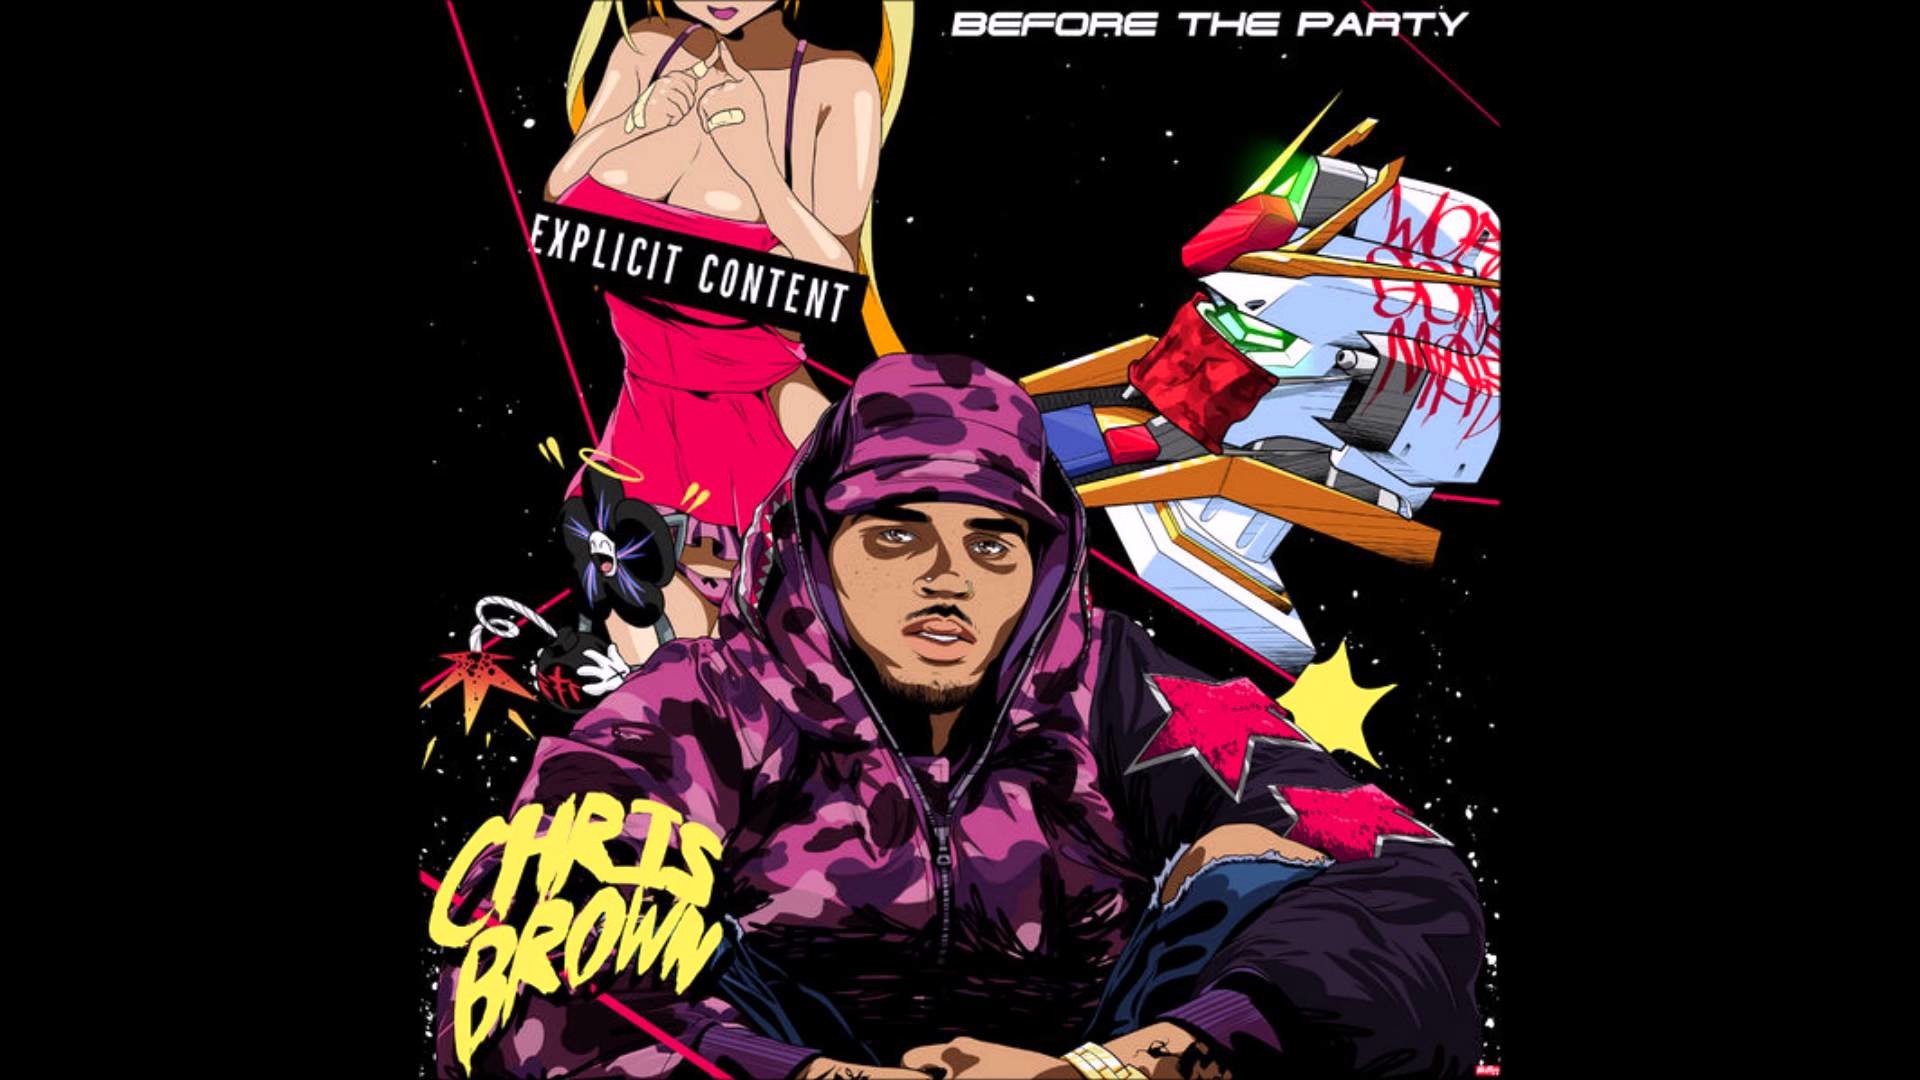 1920x1080 Chris Brown Right Now - Before The Party